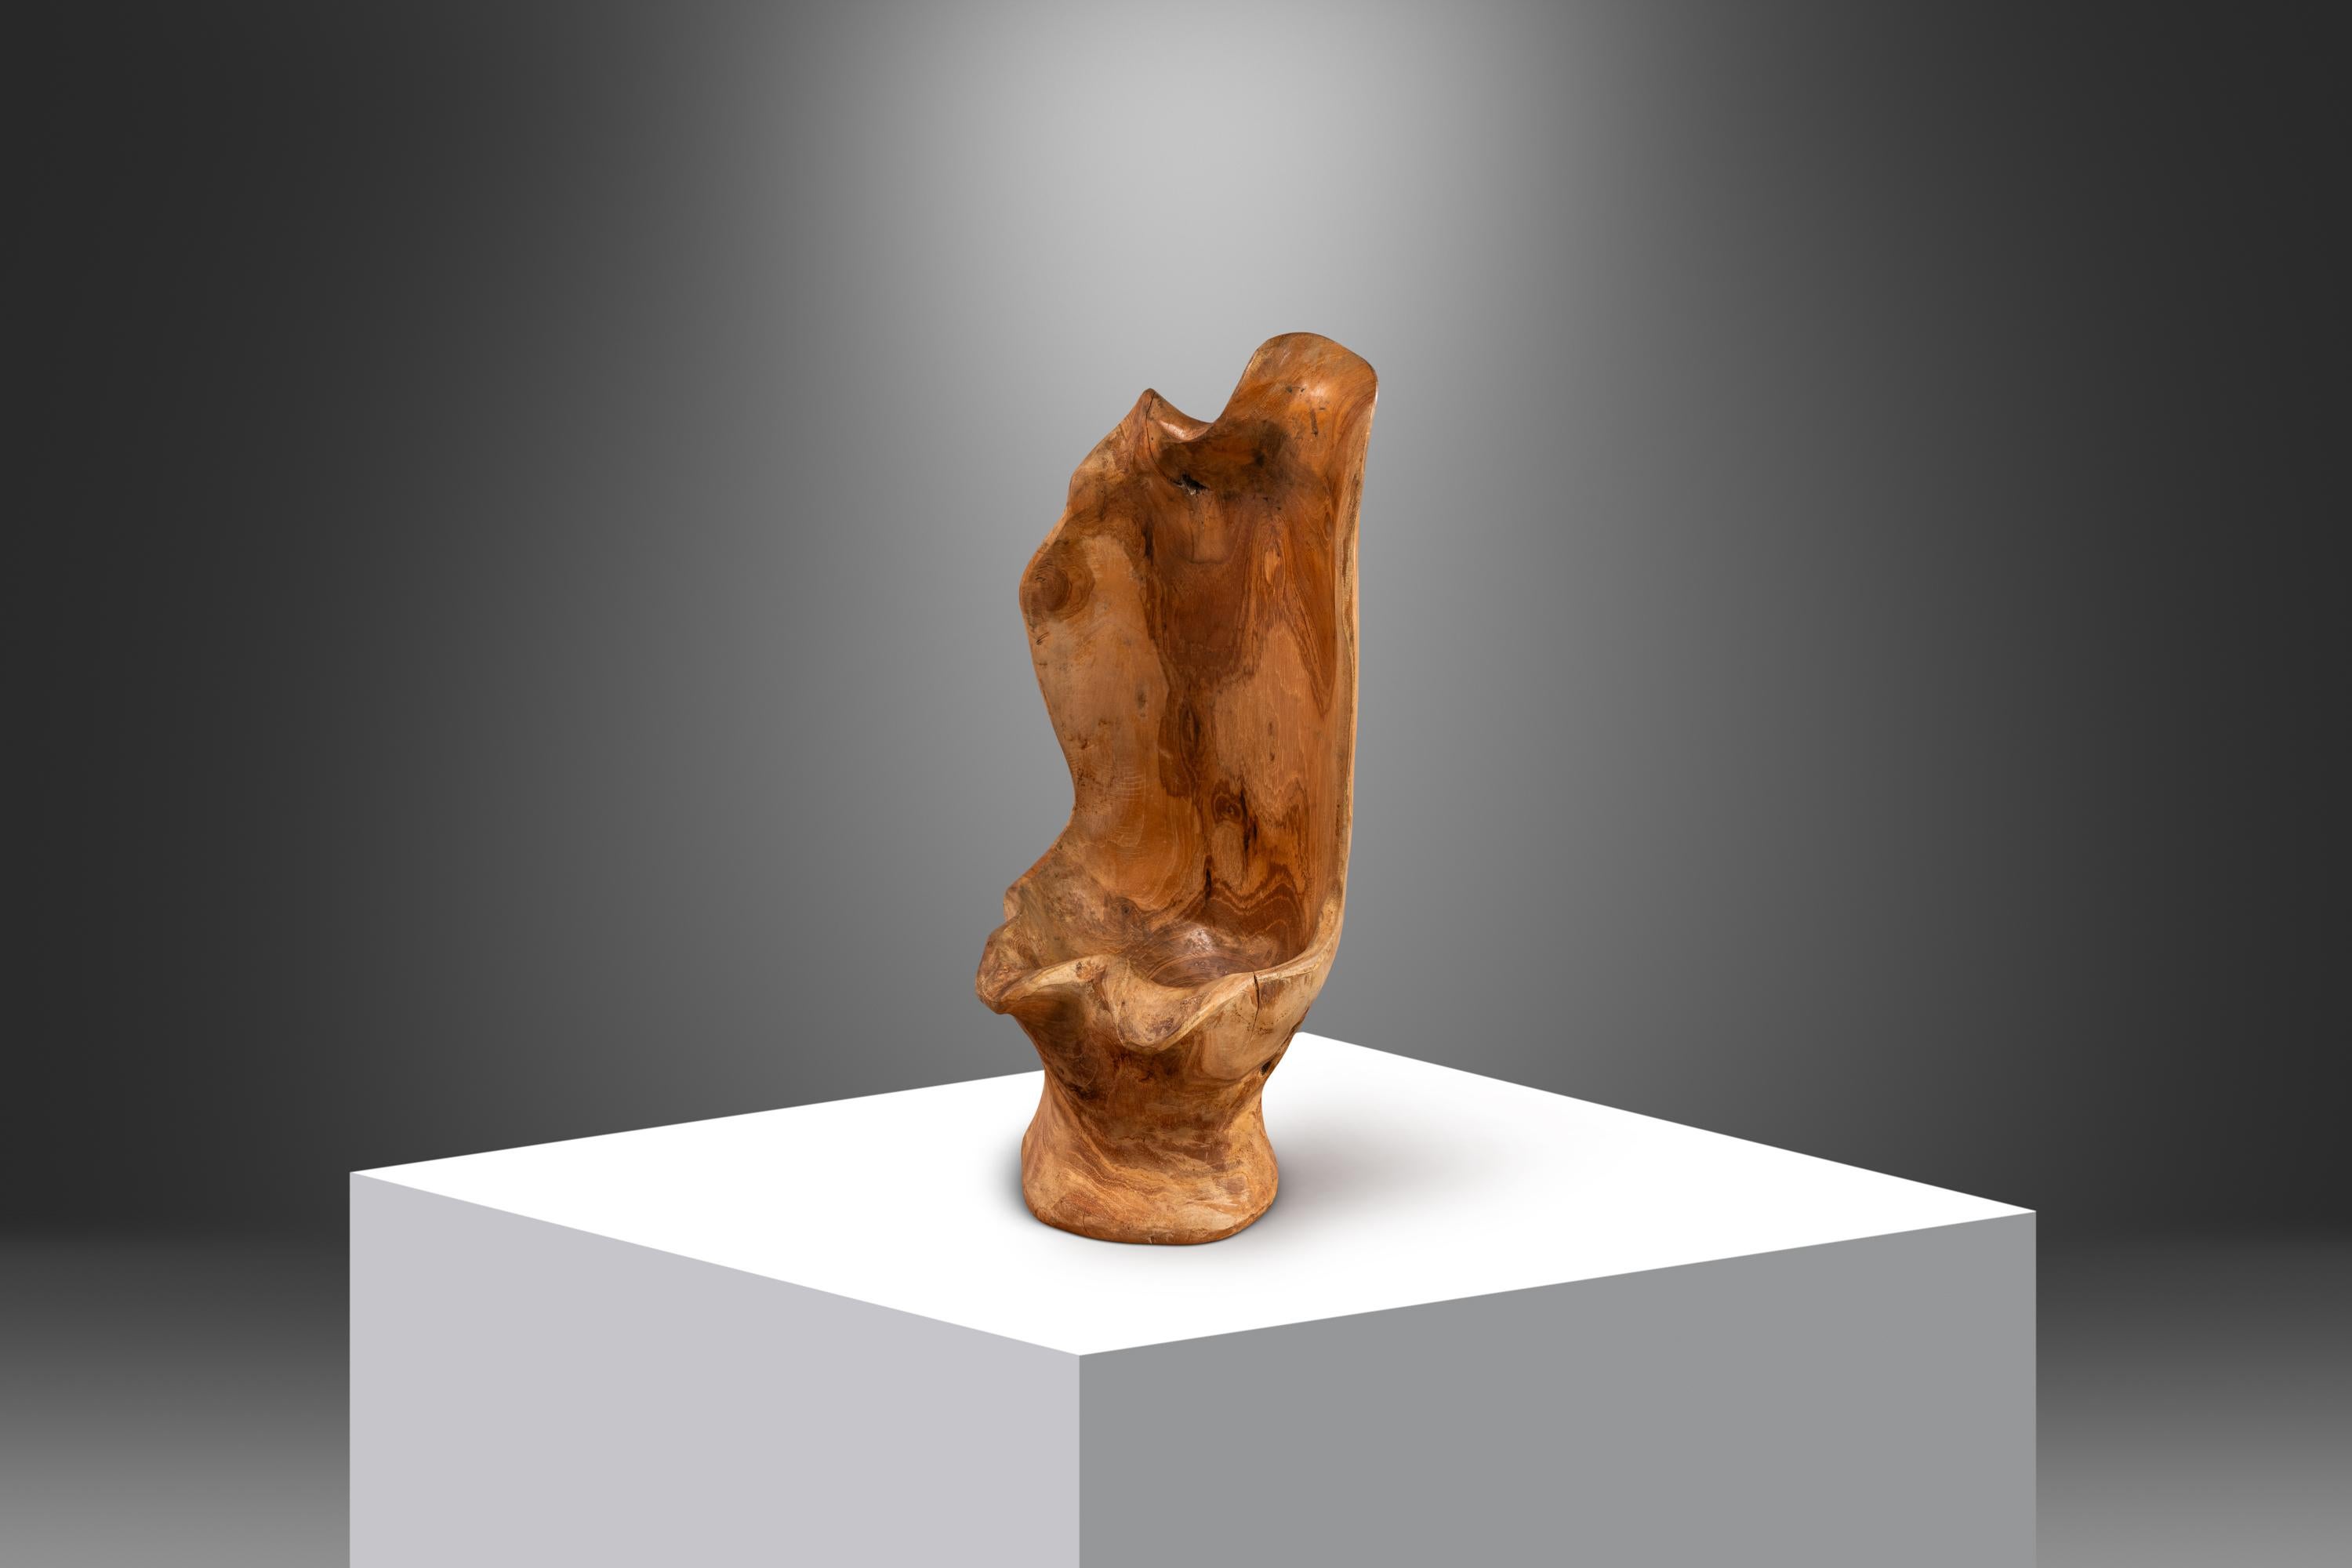 Introducing a solid teak sculpture hand-carved from a rare burlwood portion of the coveted Burmese teak tree. Burlwood results from harvesting a tree or a portion of a tree that has a burl. A burl is a growth on a tree formed from unsprouted bud